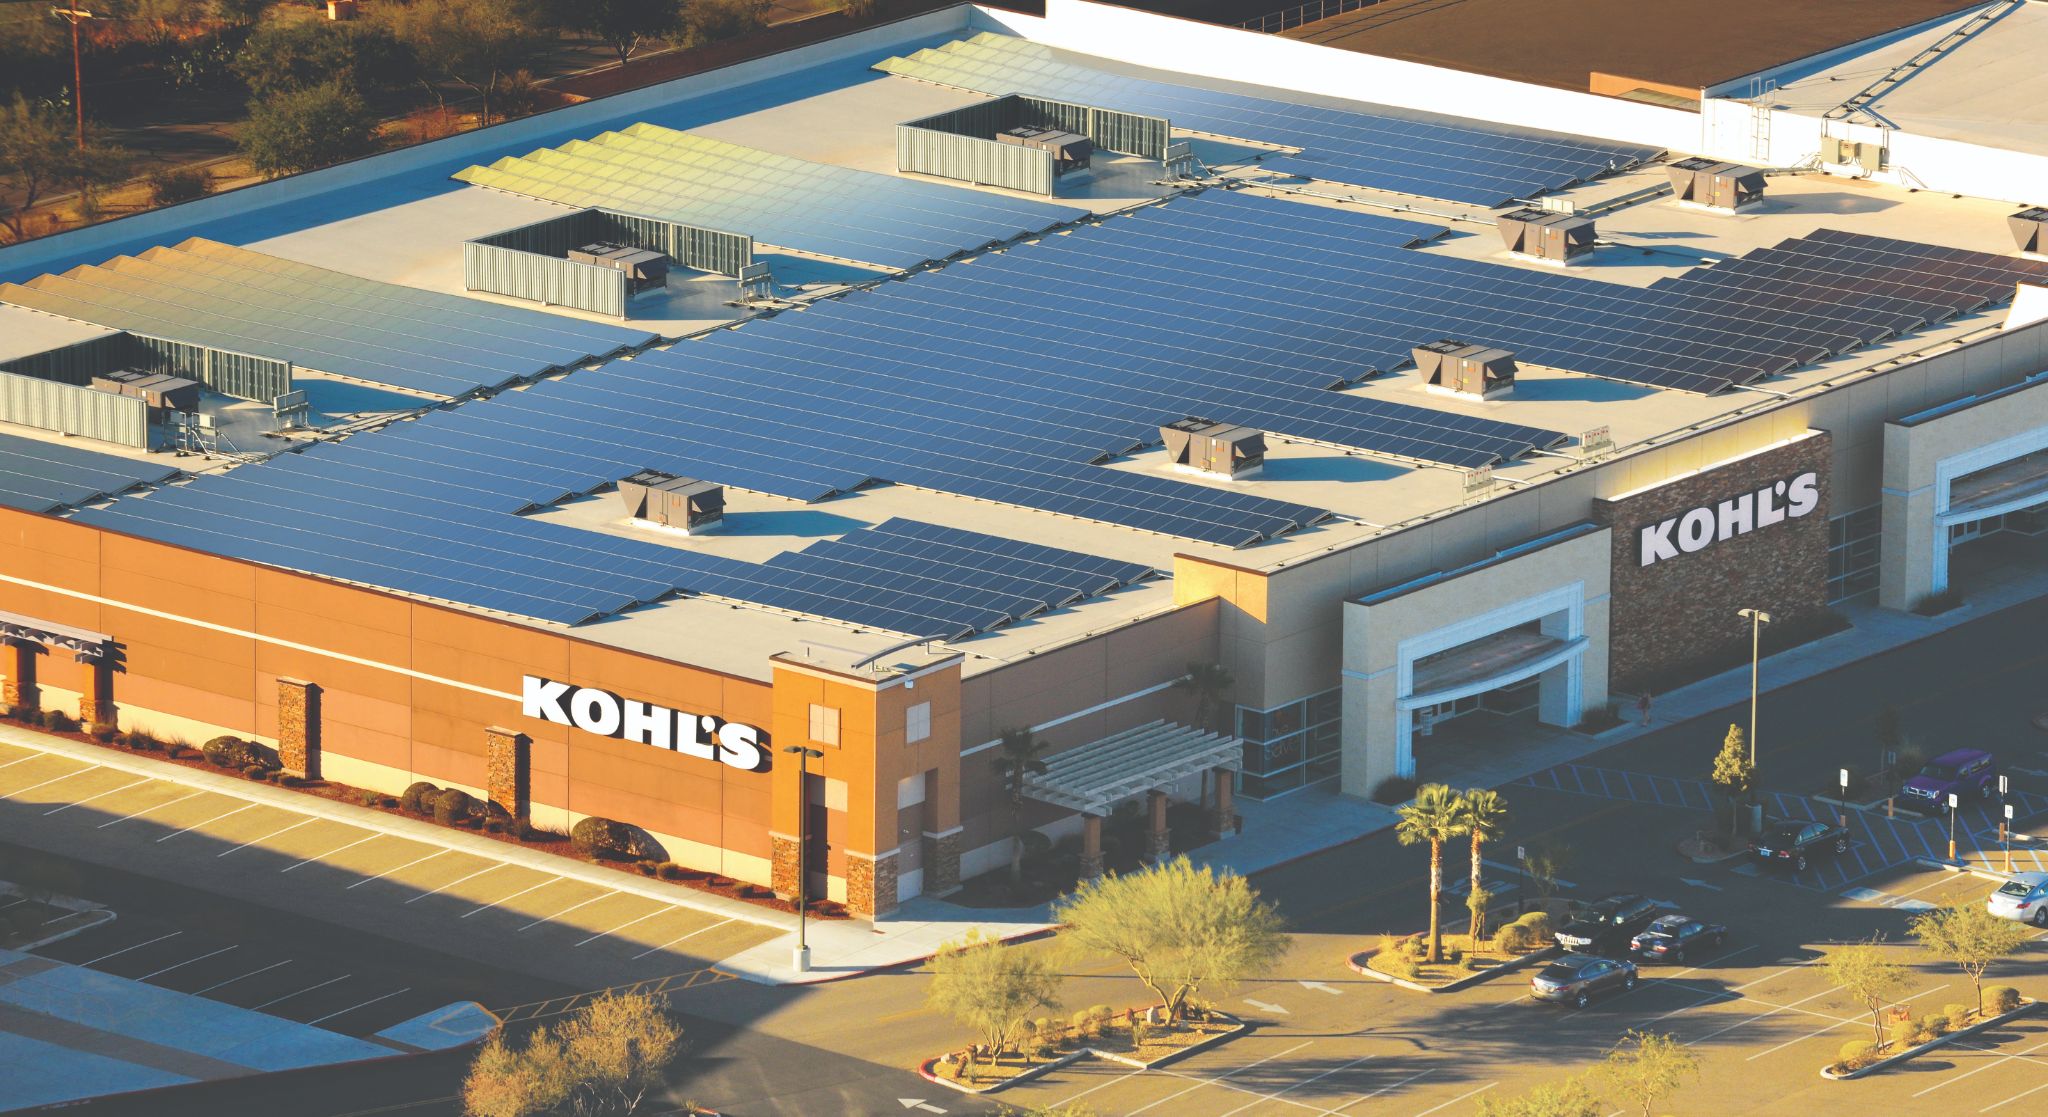 Kohl's - Department Store in Blue Bell